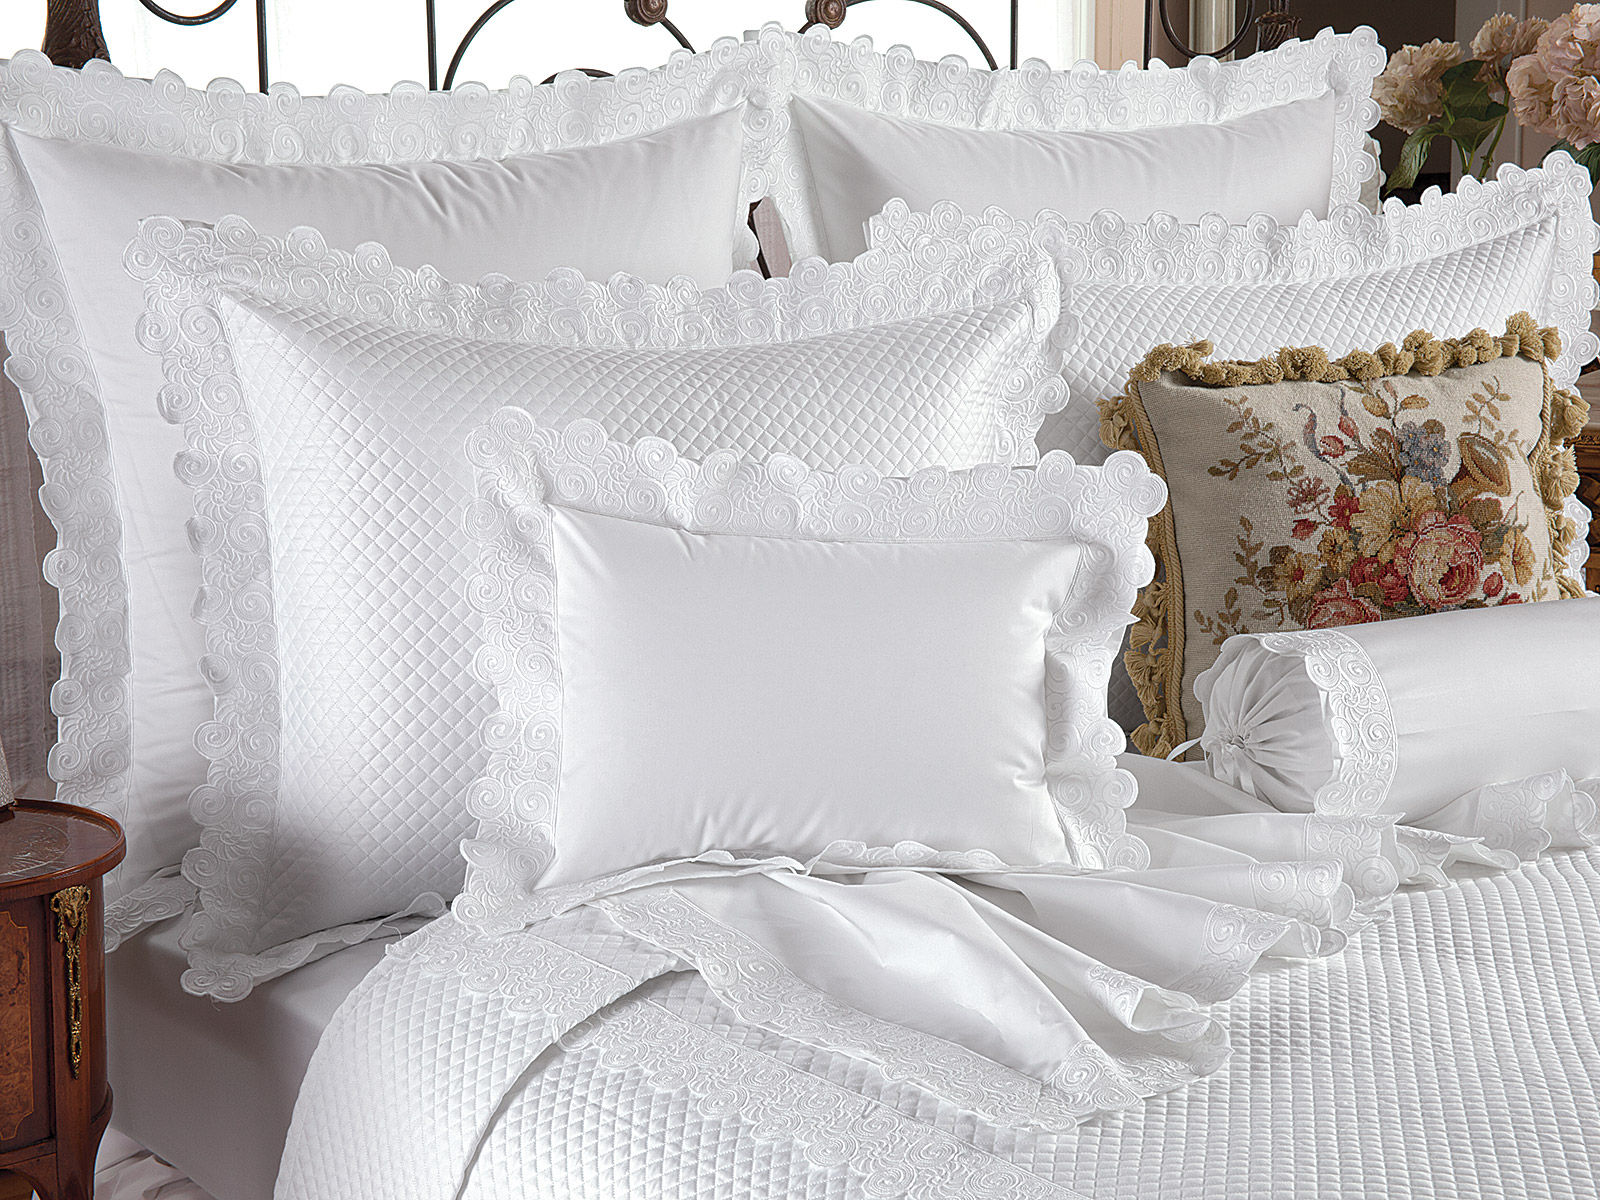  image of a Dover bed linens